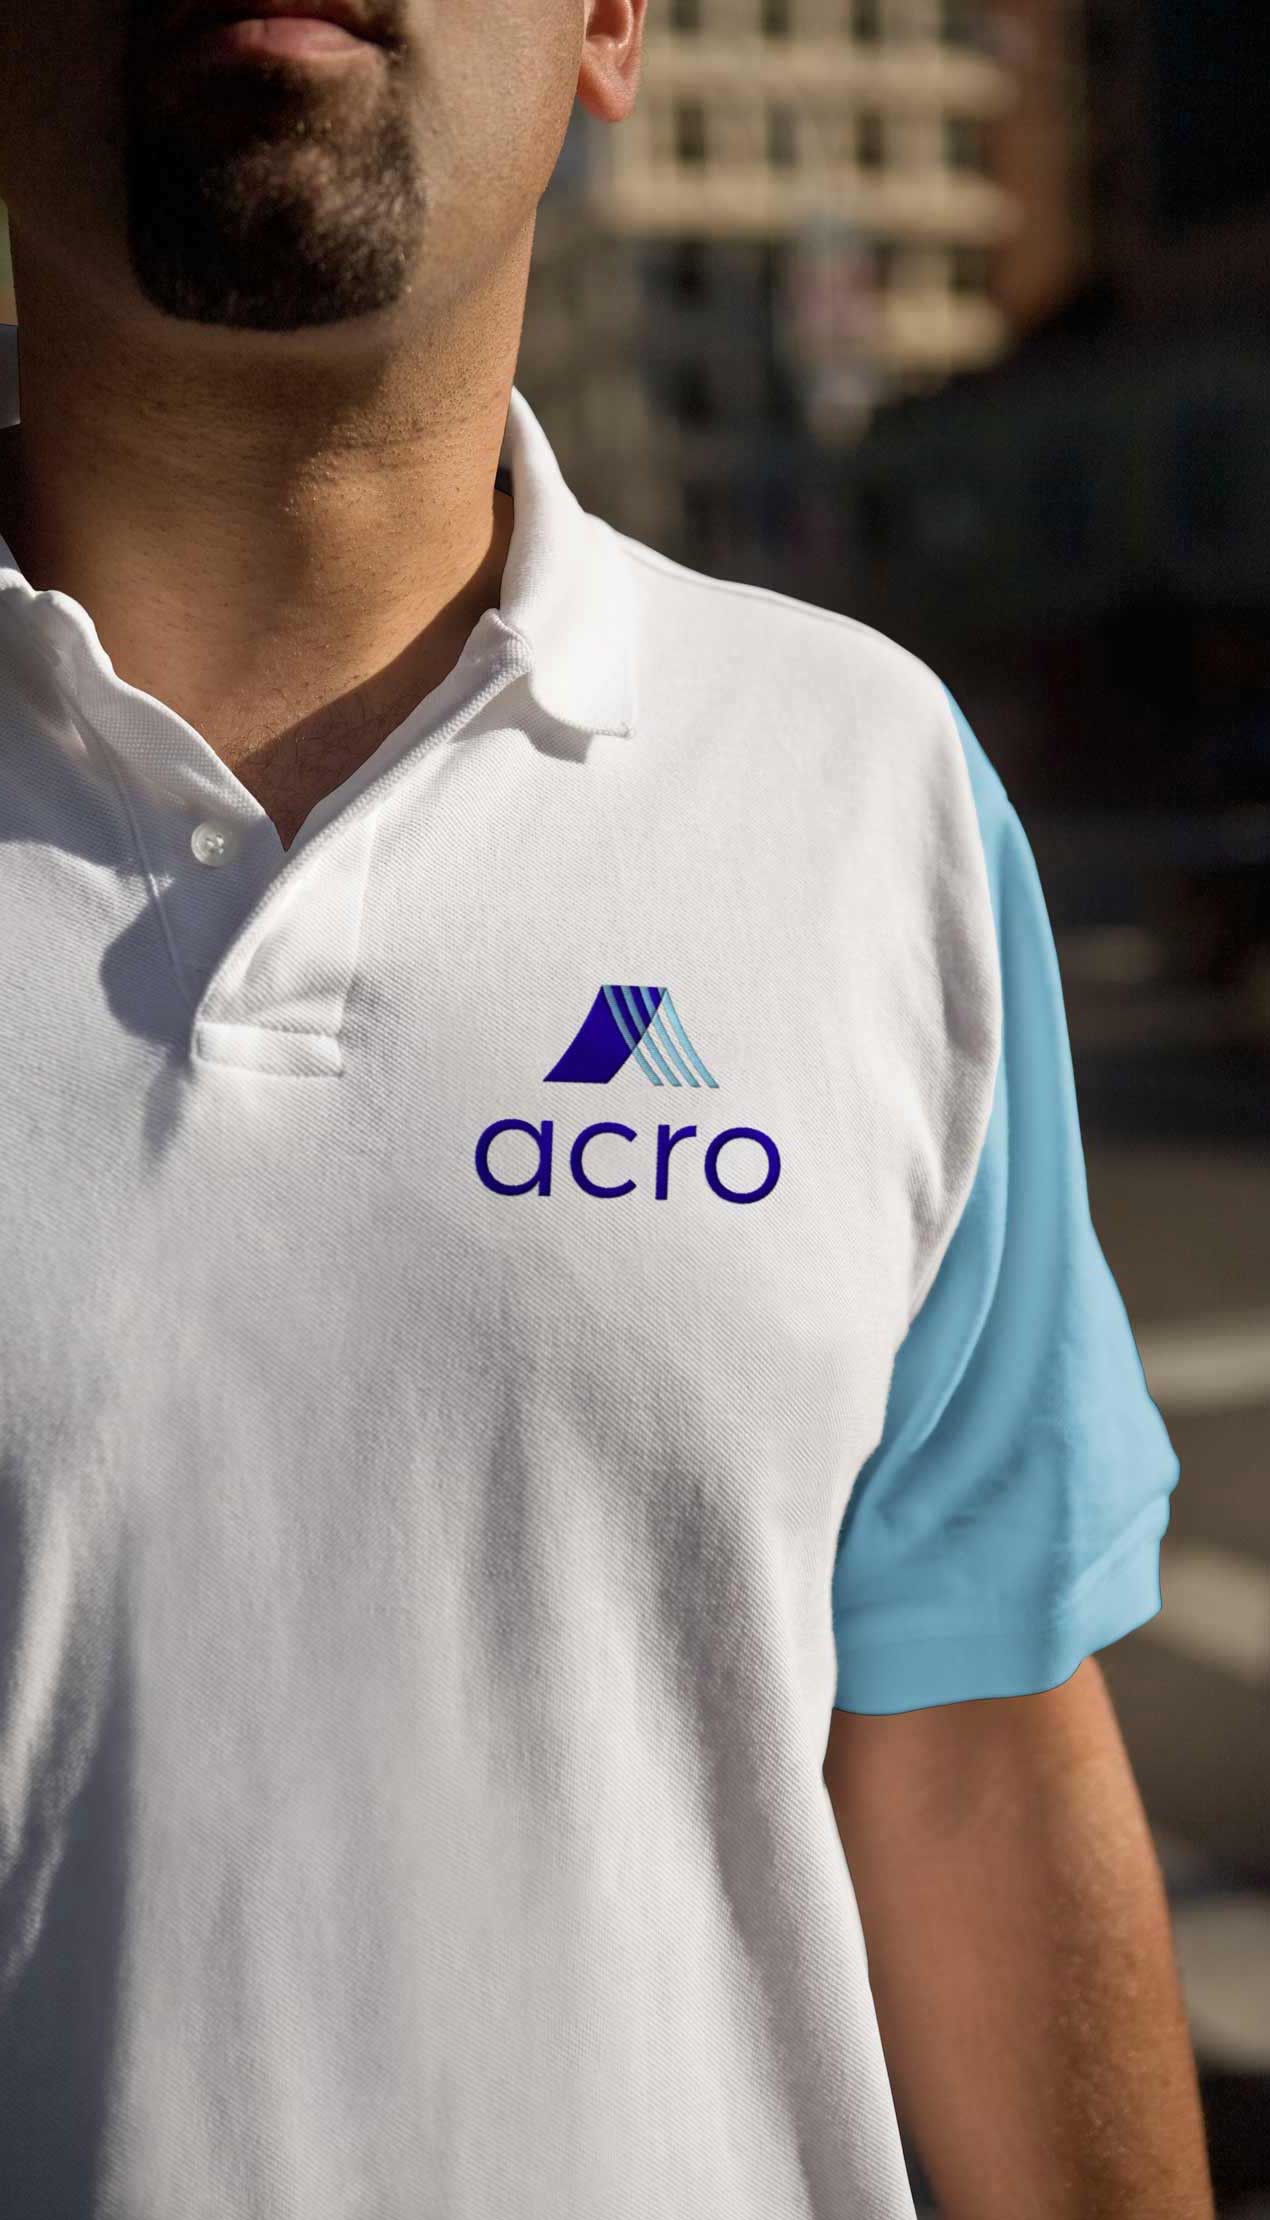 acro uniform with logo and colored sleeves